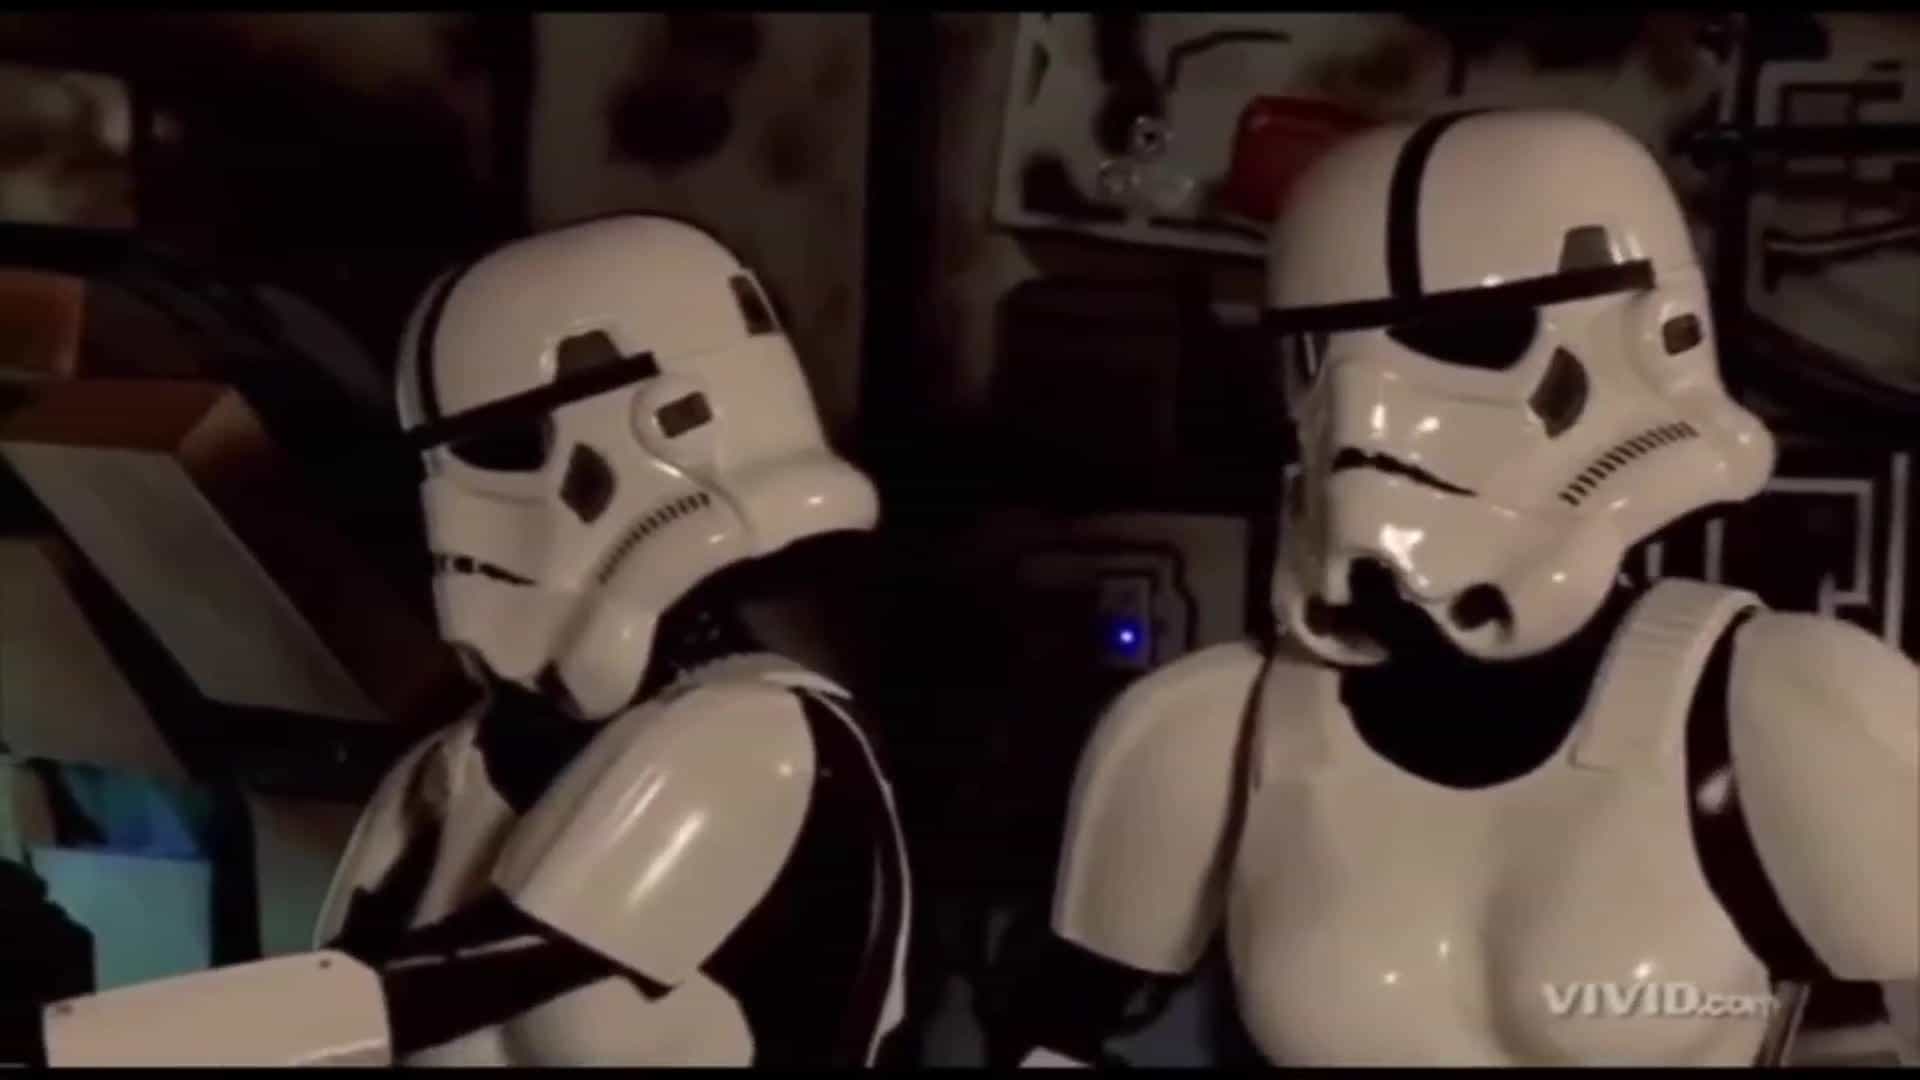 Stormtrooper Babes Get Some Wookie Dick (May The 4th Be With You)